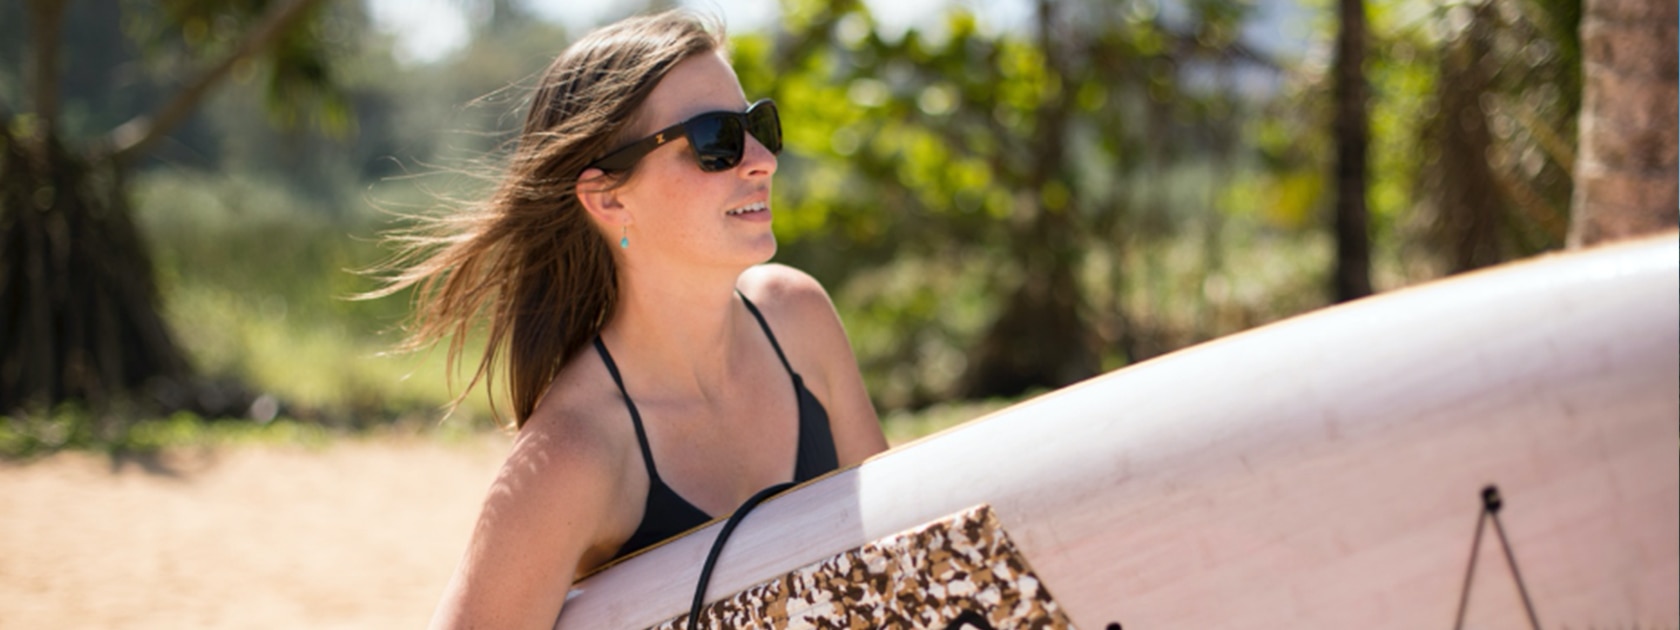 a woman wearing sunglasses and a black top carries a surfboard